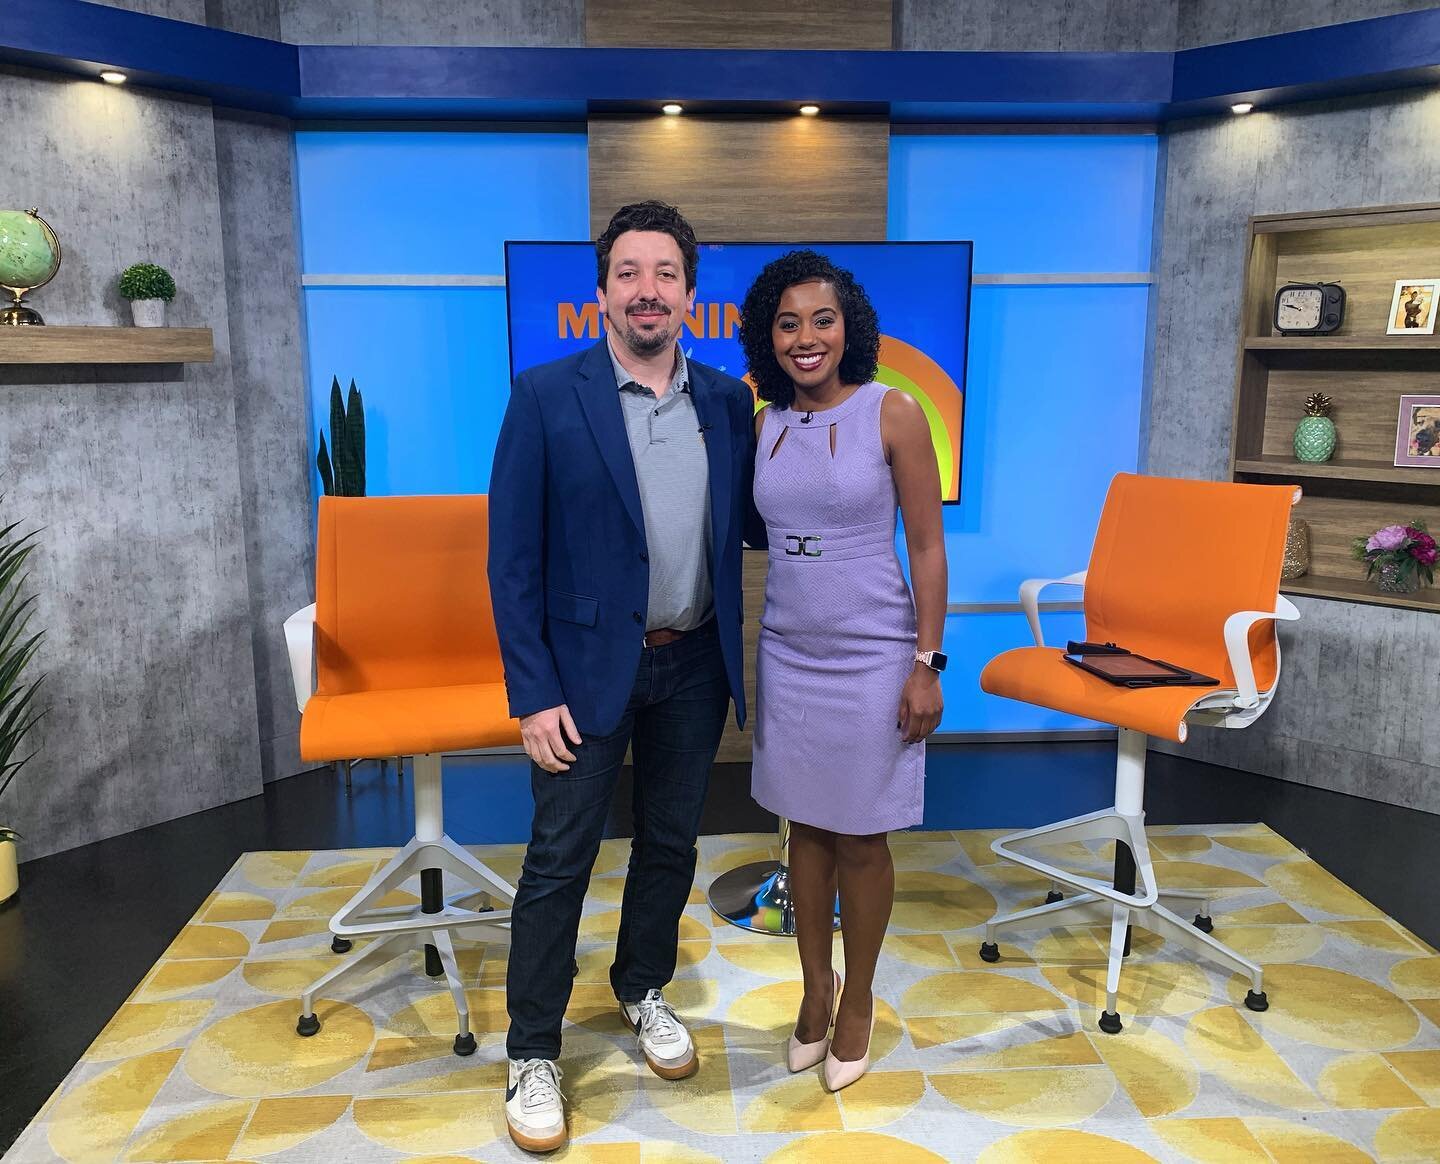 Allan was a guest on The Morning Mix this morning sharing all about the Vinea Foundation! You can check out his interview on the WRDW website now!

#vineafoundation #augusta #augustaga #csra